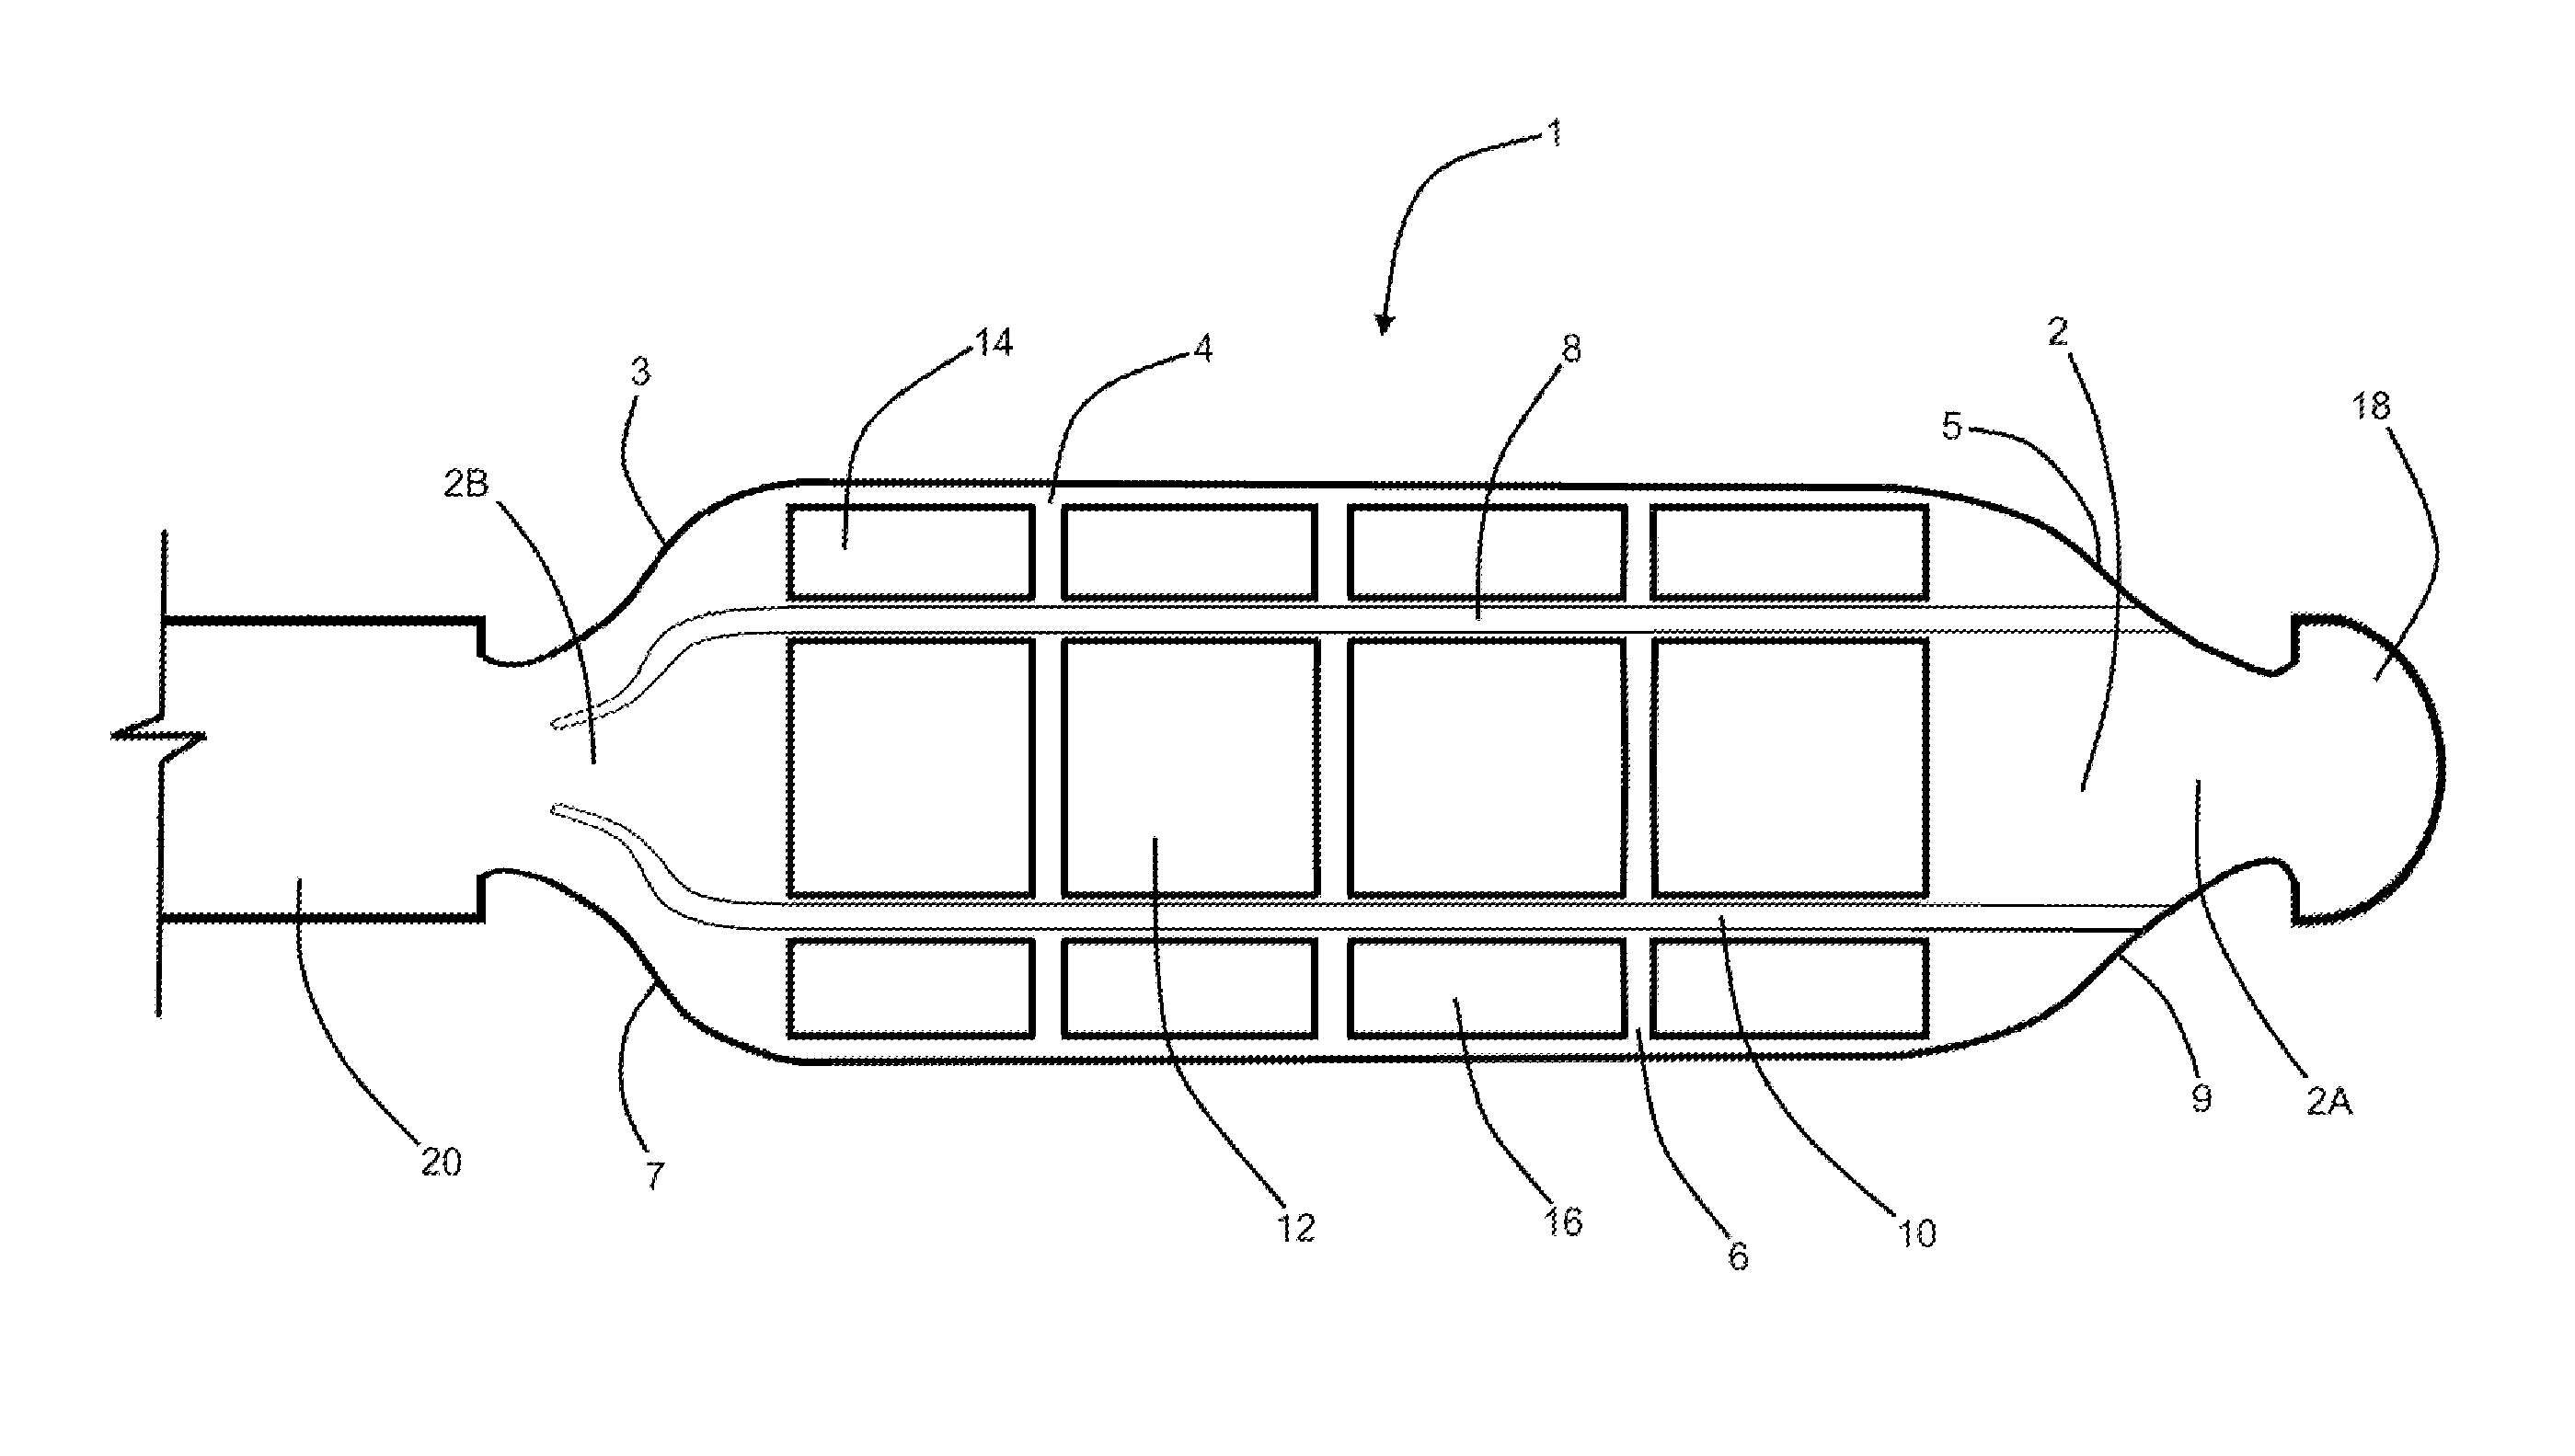 Assembly For Pain Suppressing Electrical Stimulation of a Patient's Nerve